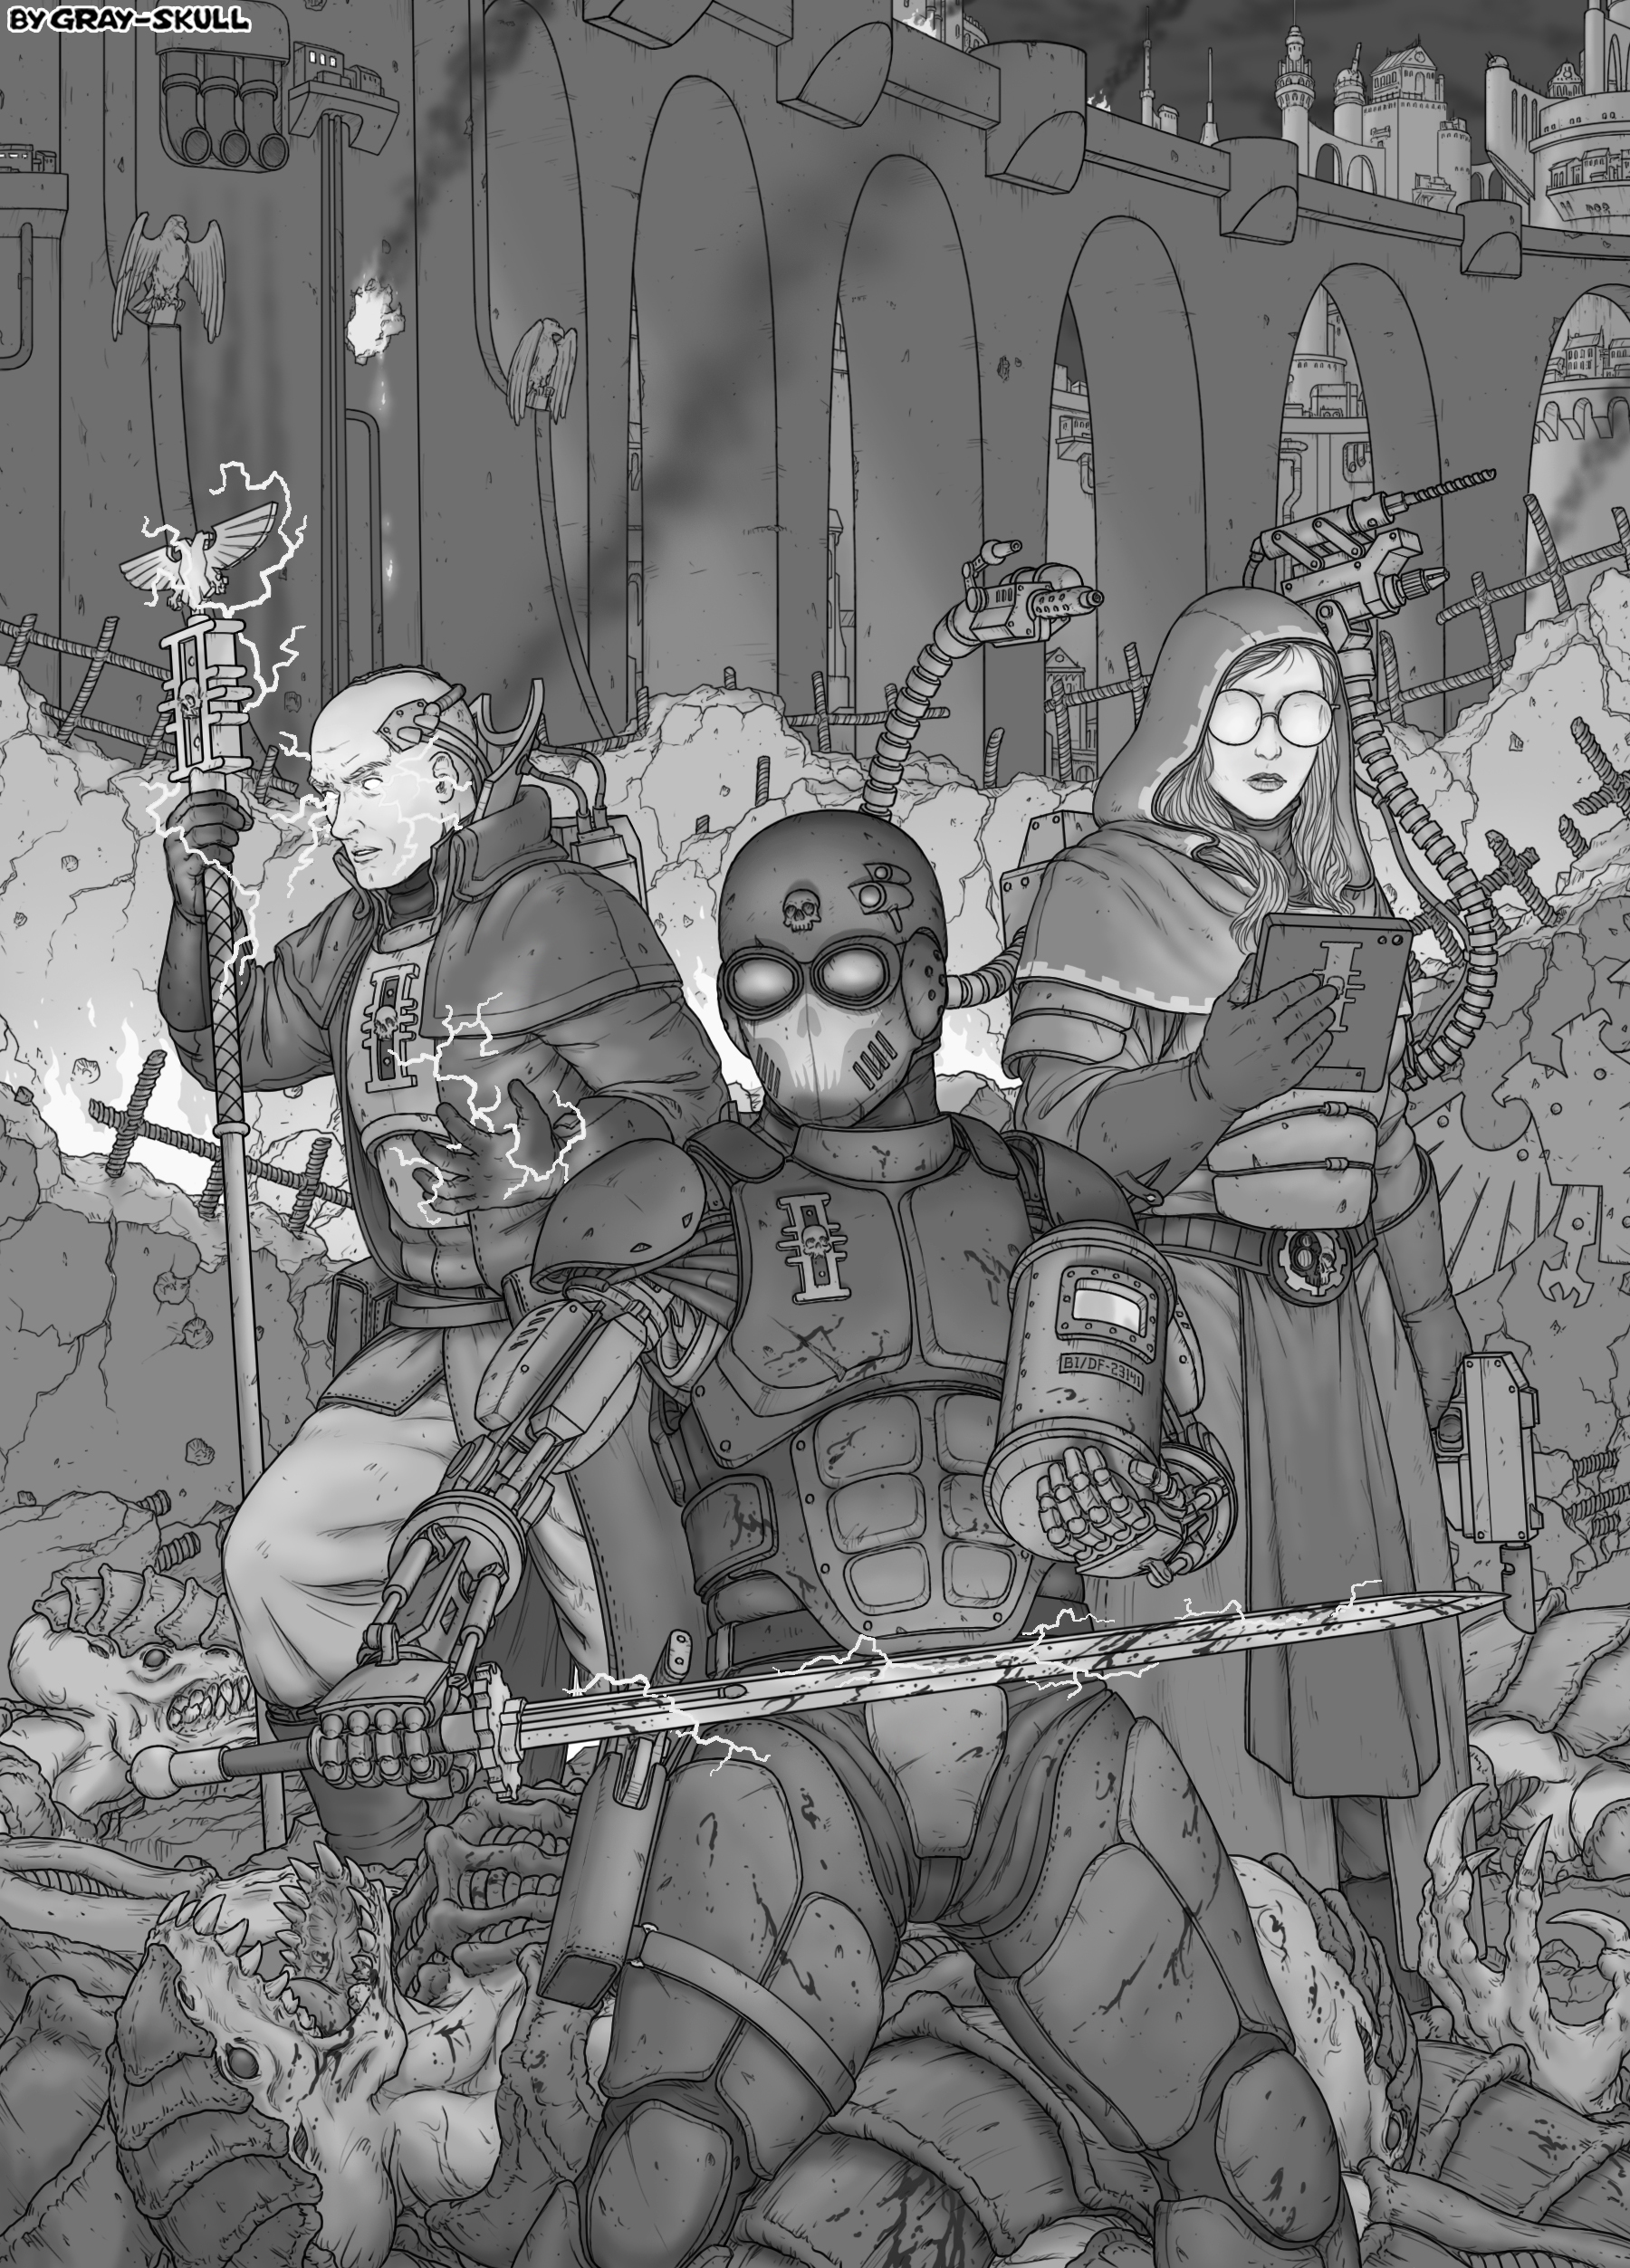 Operatives of the Inquisition (art to order) (by Gray-Skull) - My, Warhammer 40k, Warhammer, Wh Art, Gray-skull, Adeptus Mechanicus, Psyker, Genestealers, Inquisition, Ordo xenos, Images, Art